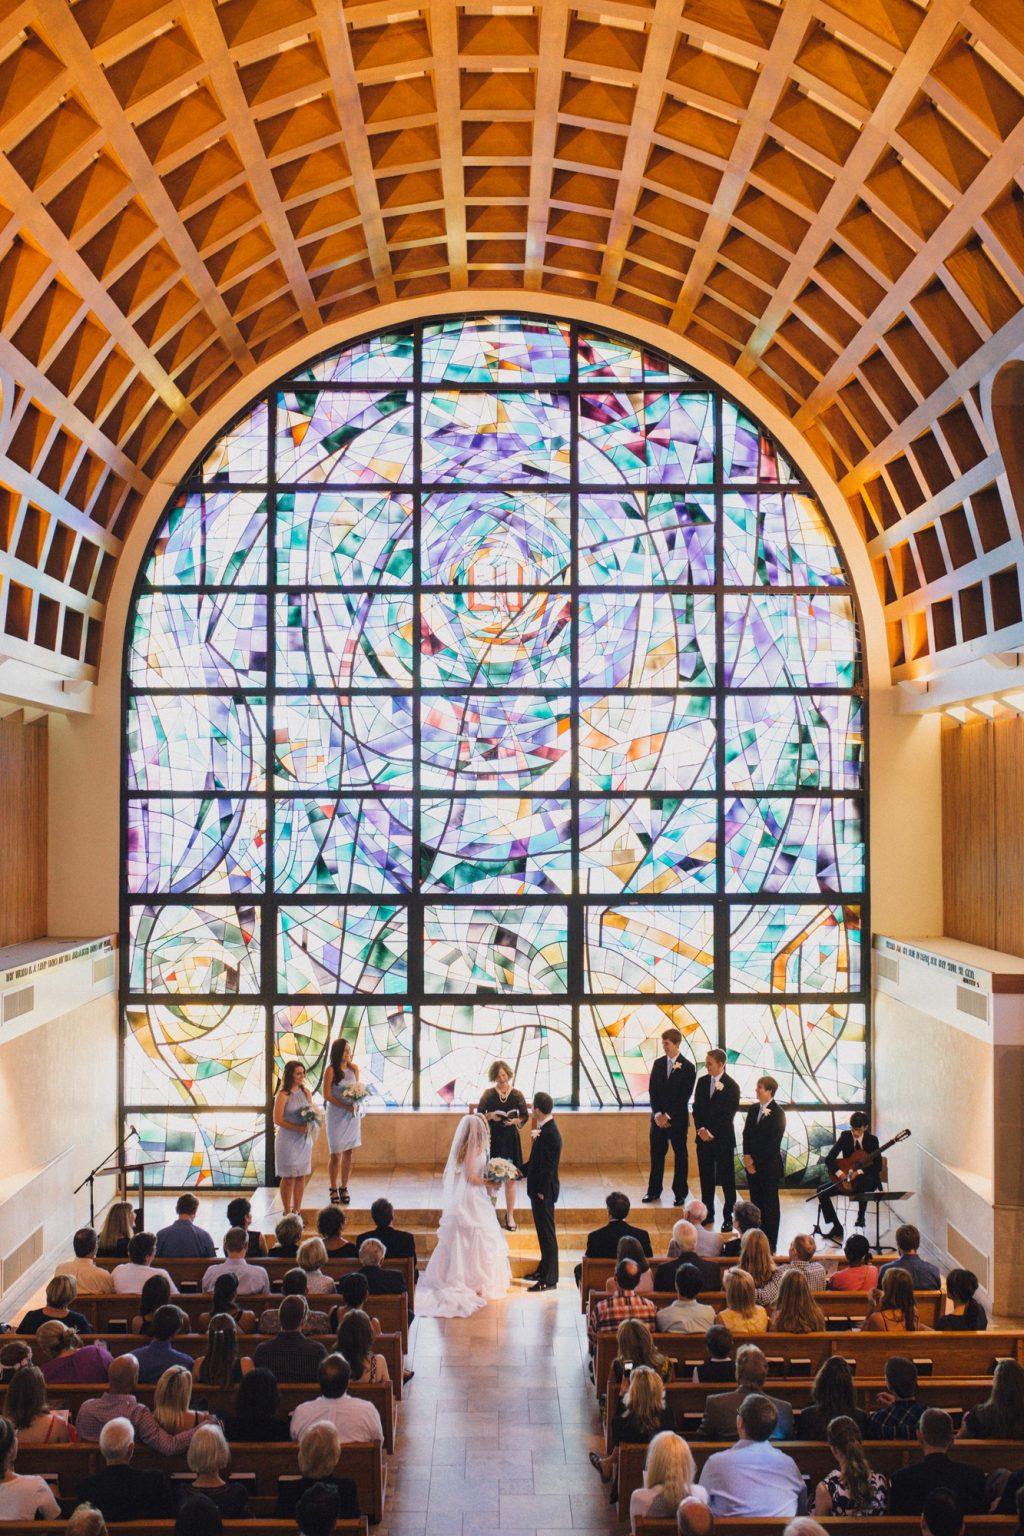 Soon-to-be-newlyweds Falon and Nate and Barton stand for their marriage ceremony in Stauffer Chapel in 2016. The two alumni tied the knot at the University's chapel. Photo courtesy of Sara Barton